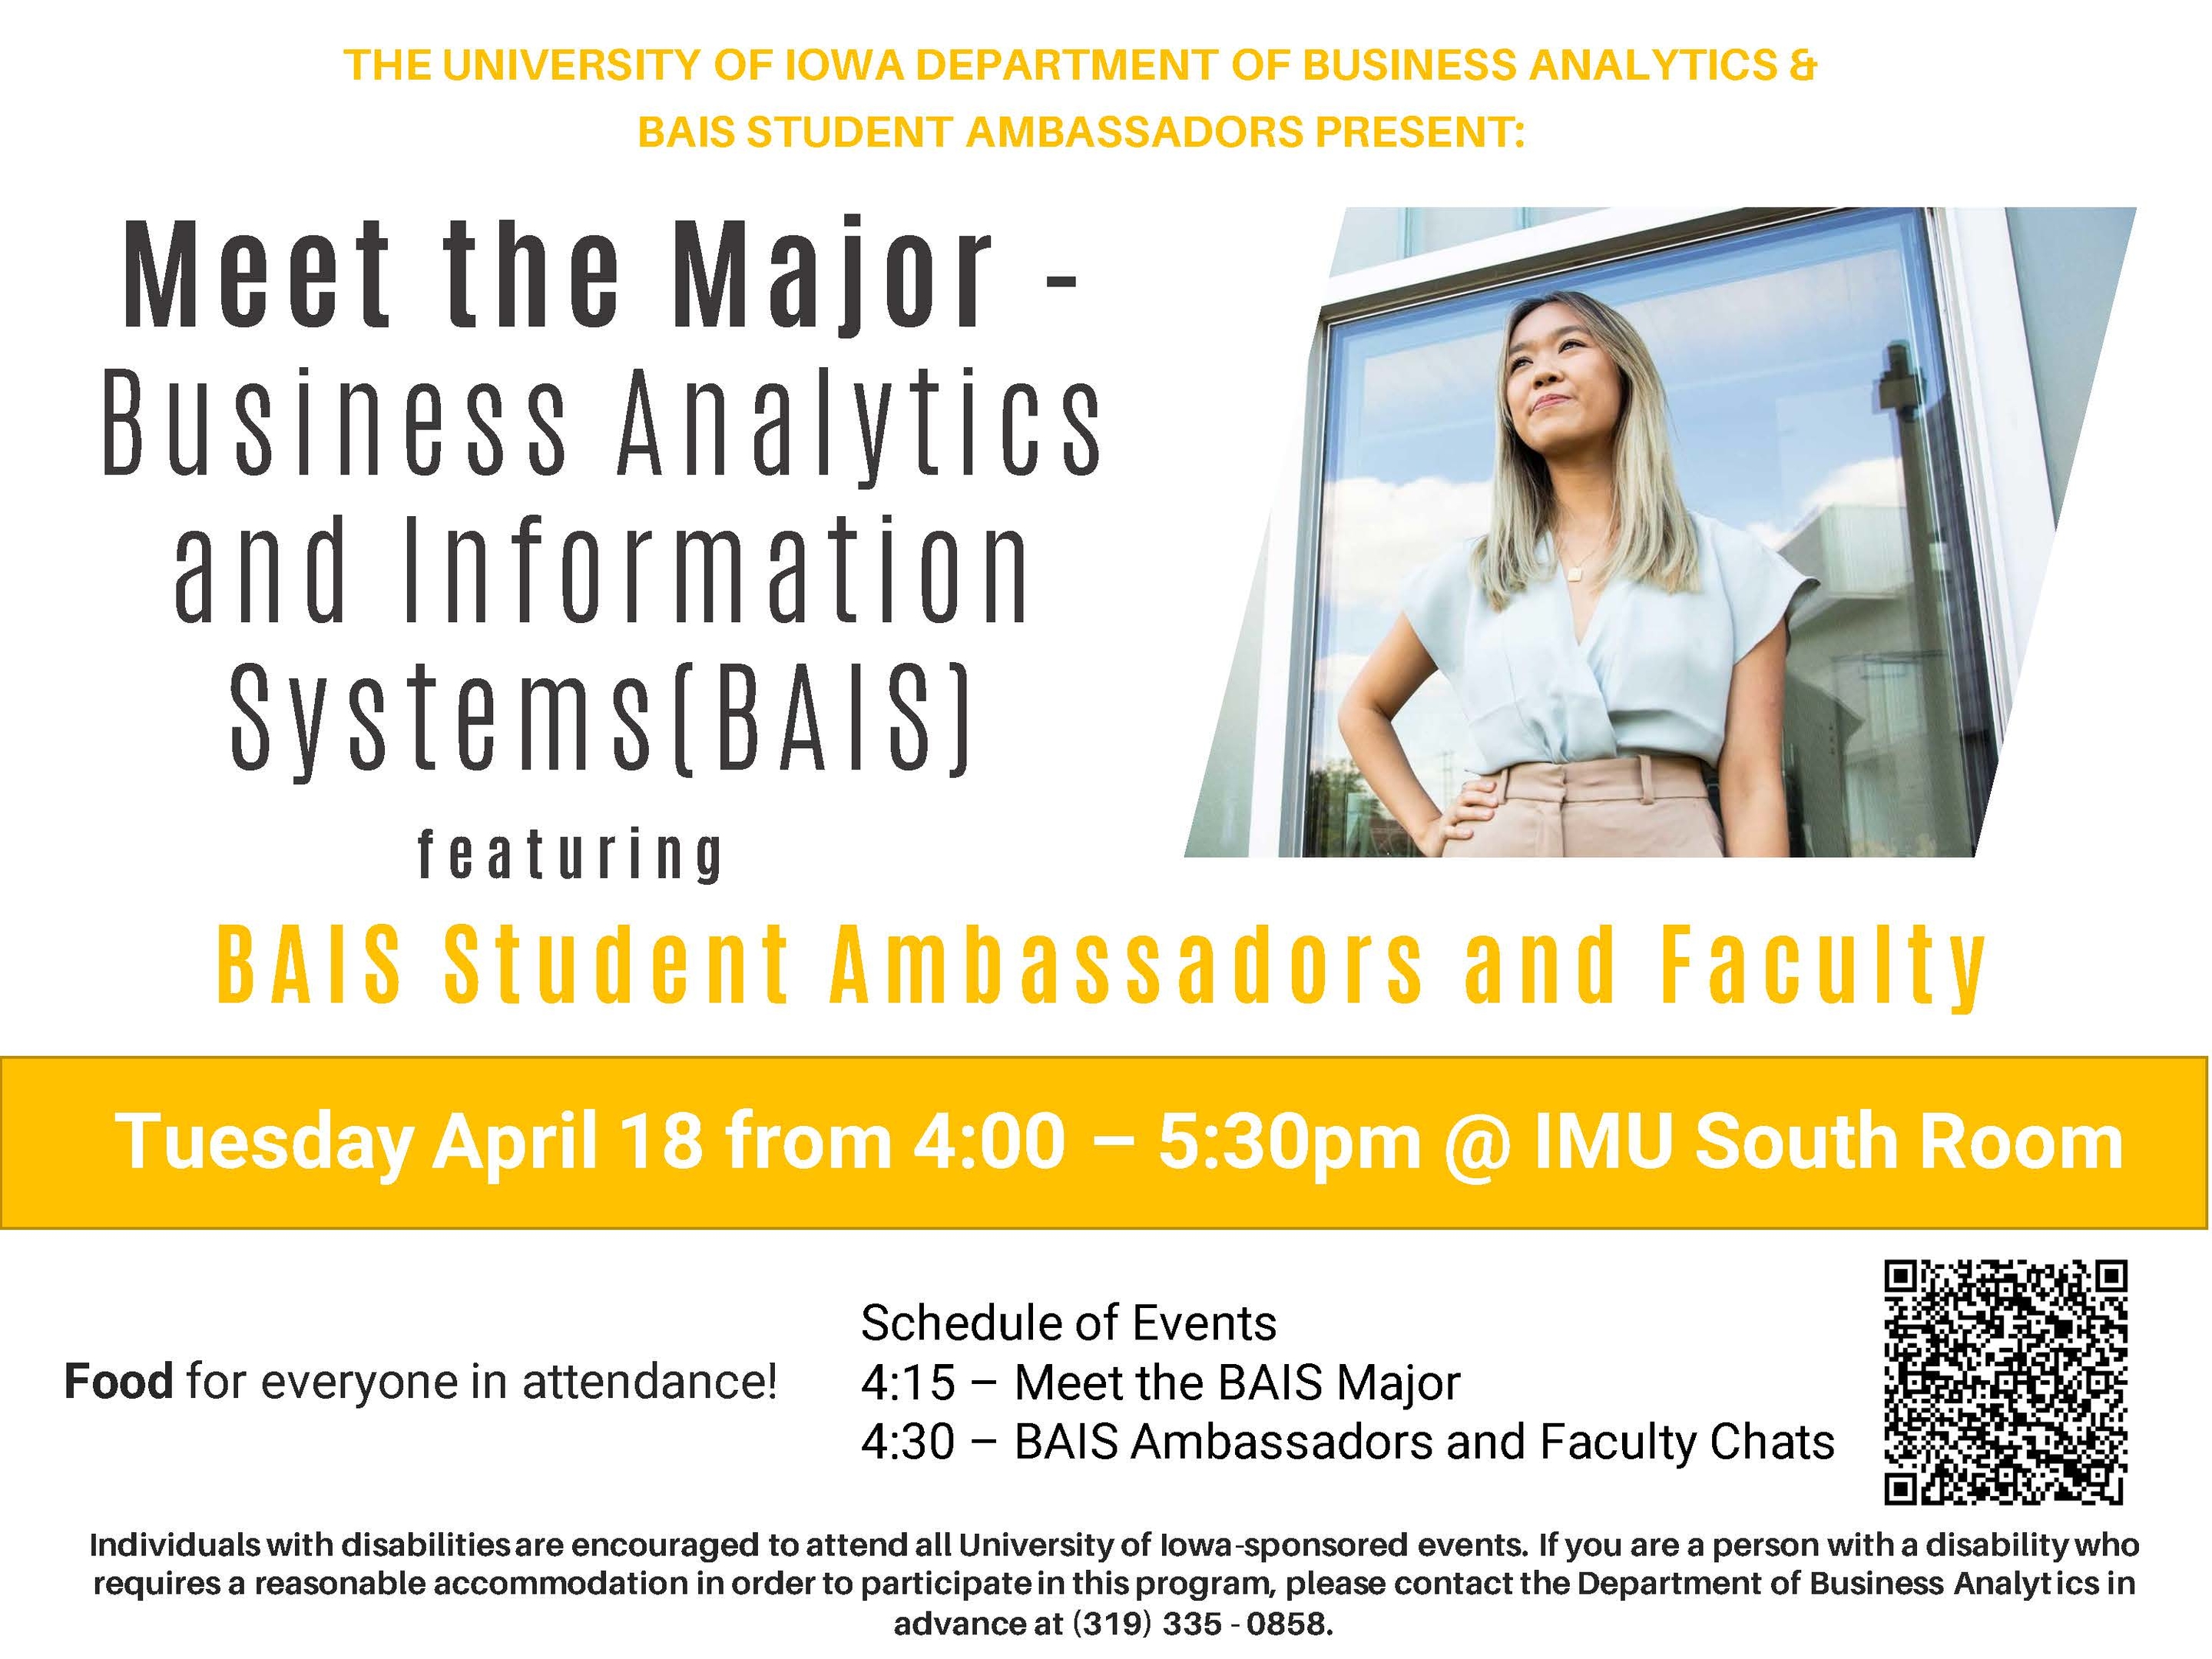 Meet the Major - Business Analytics and Information Systems (BAIS)